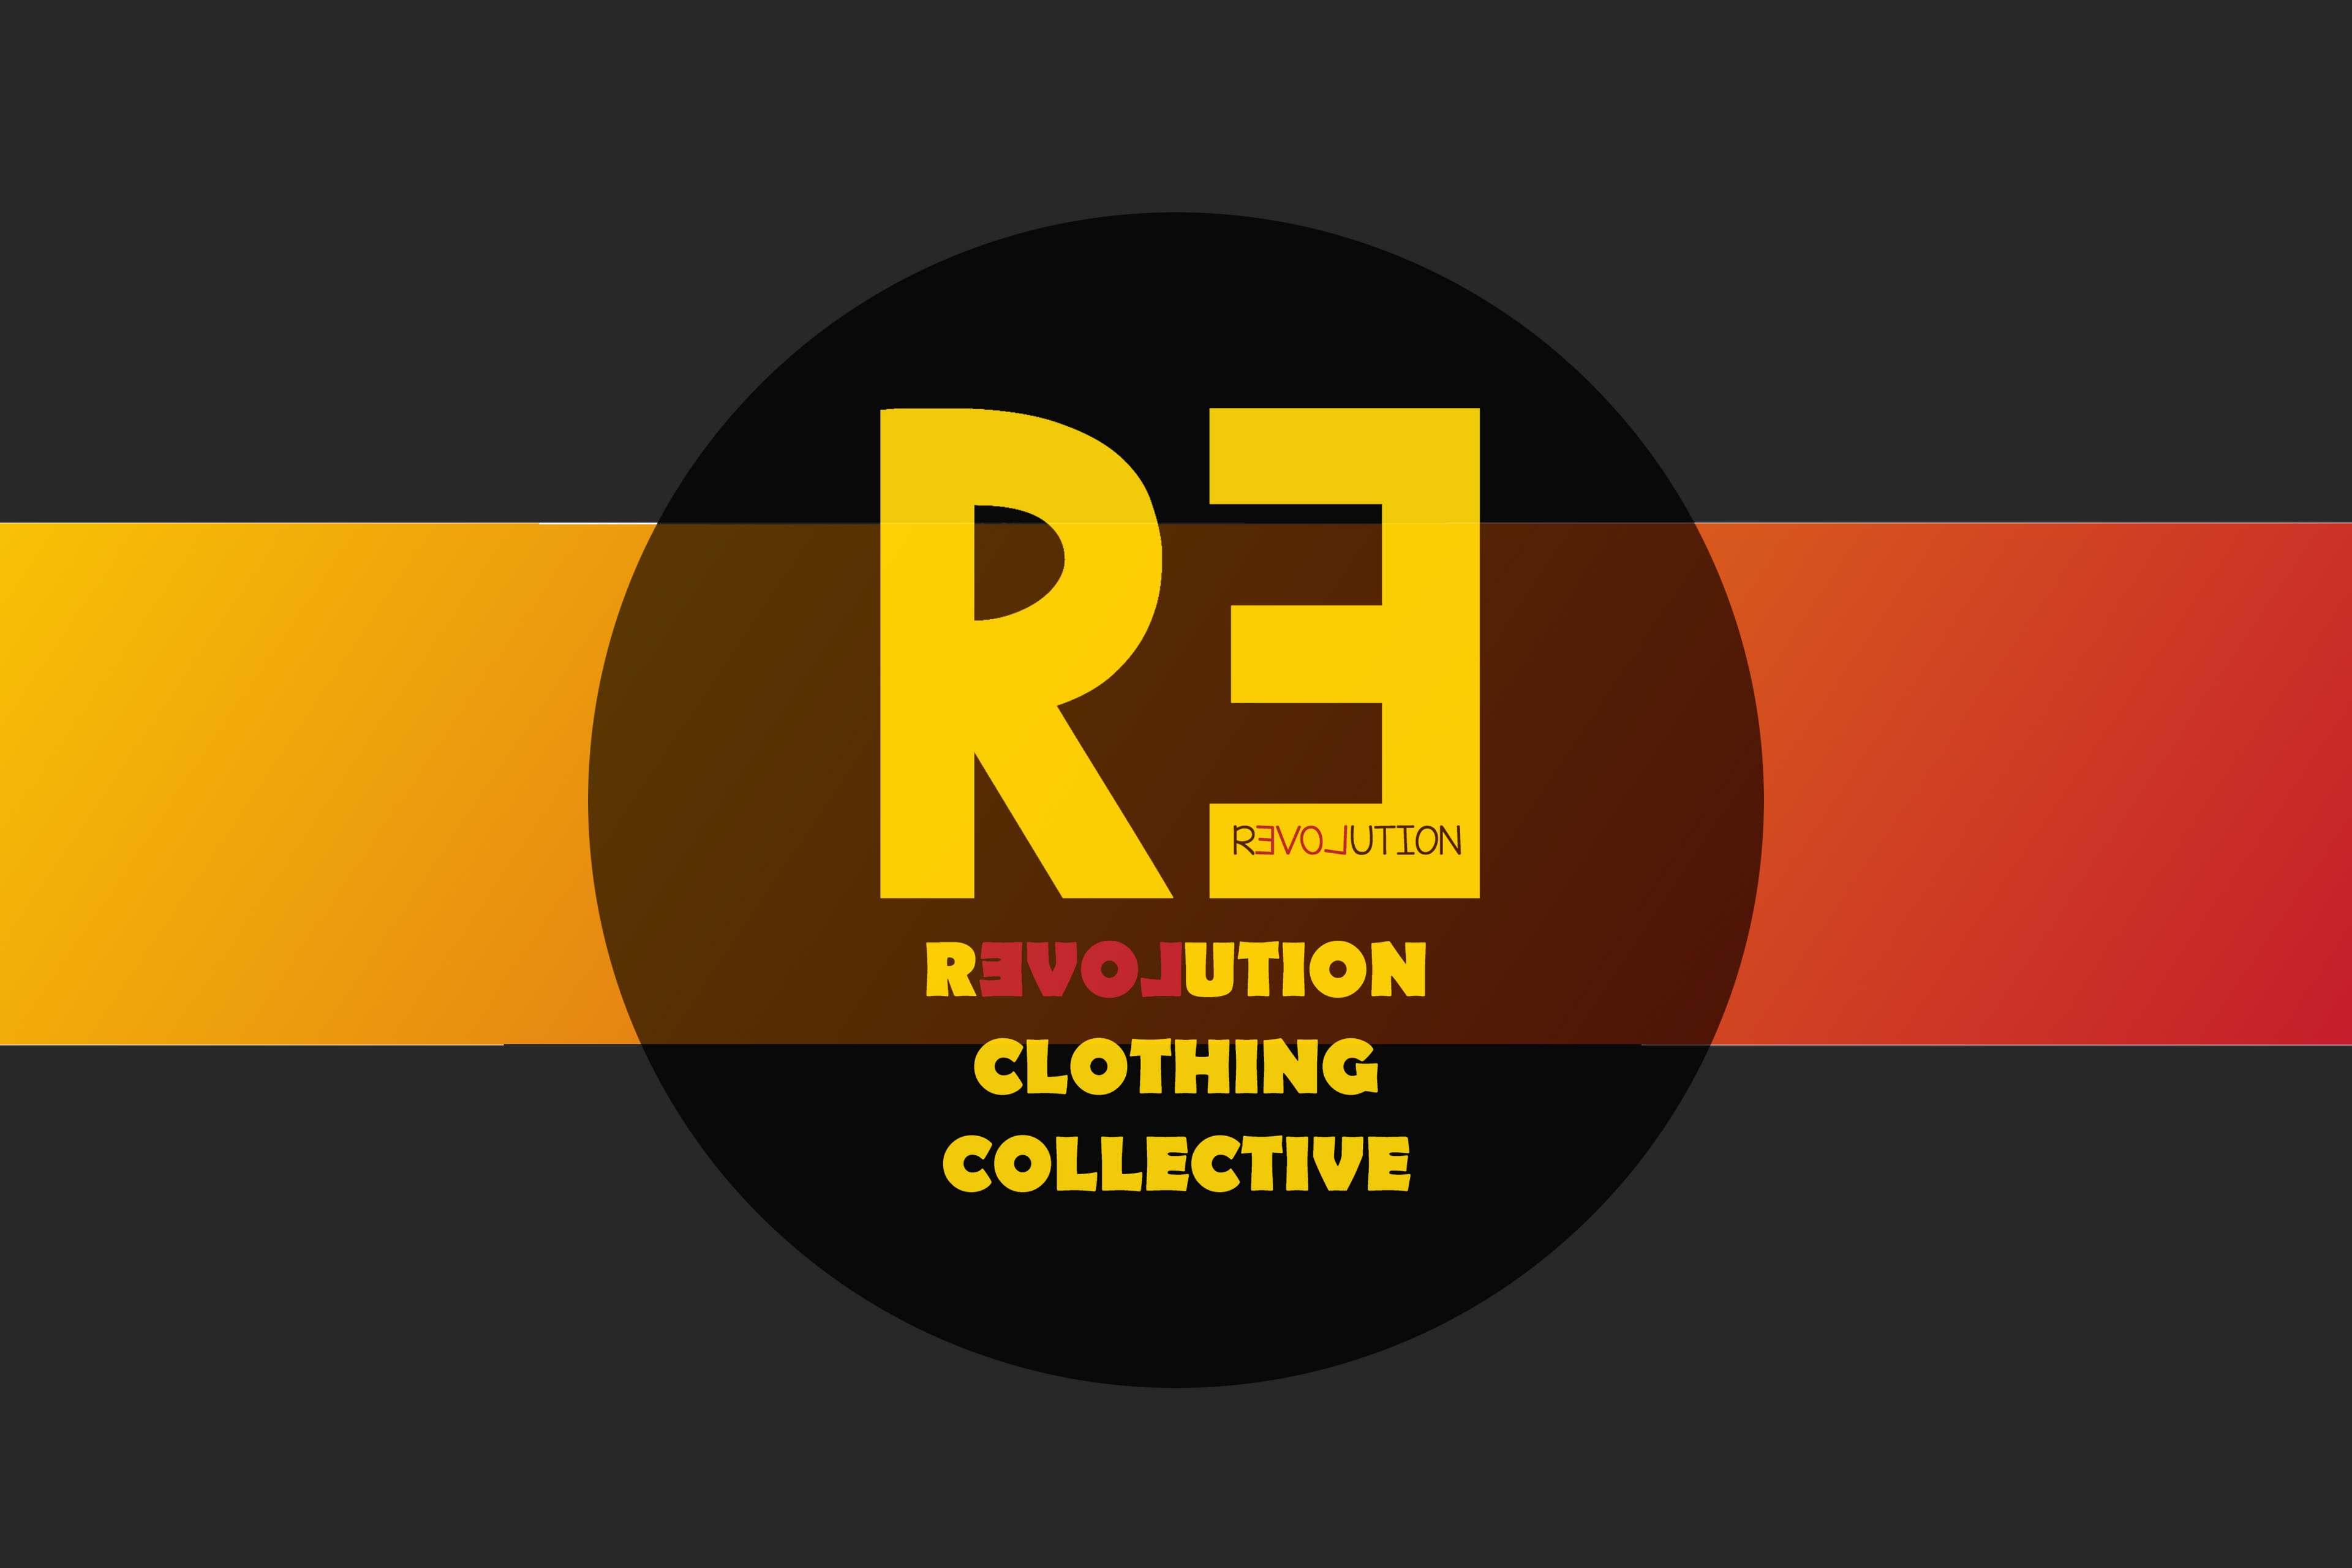 R3VOLUTION CLOTHING COLLECTIVE